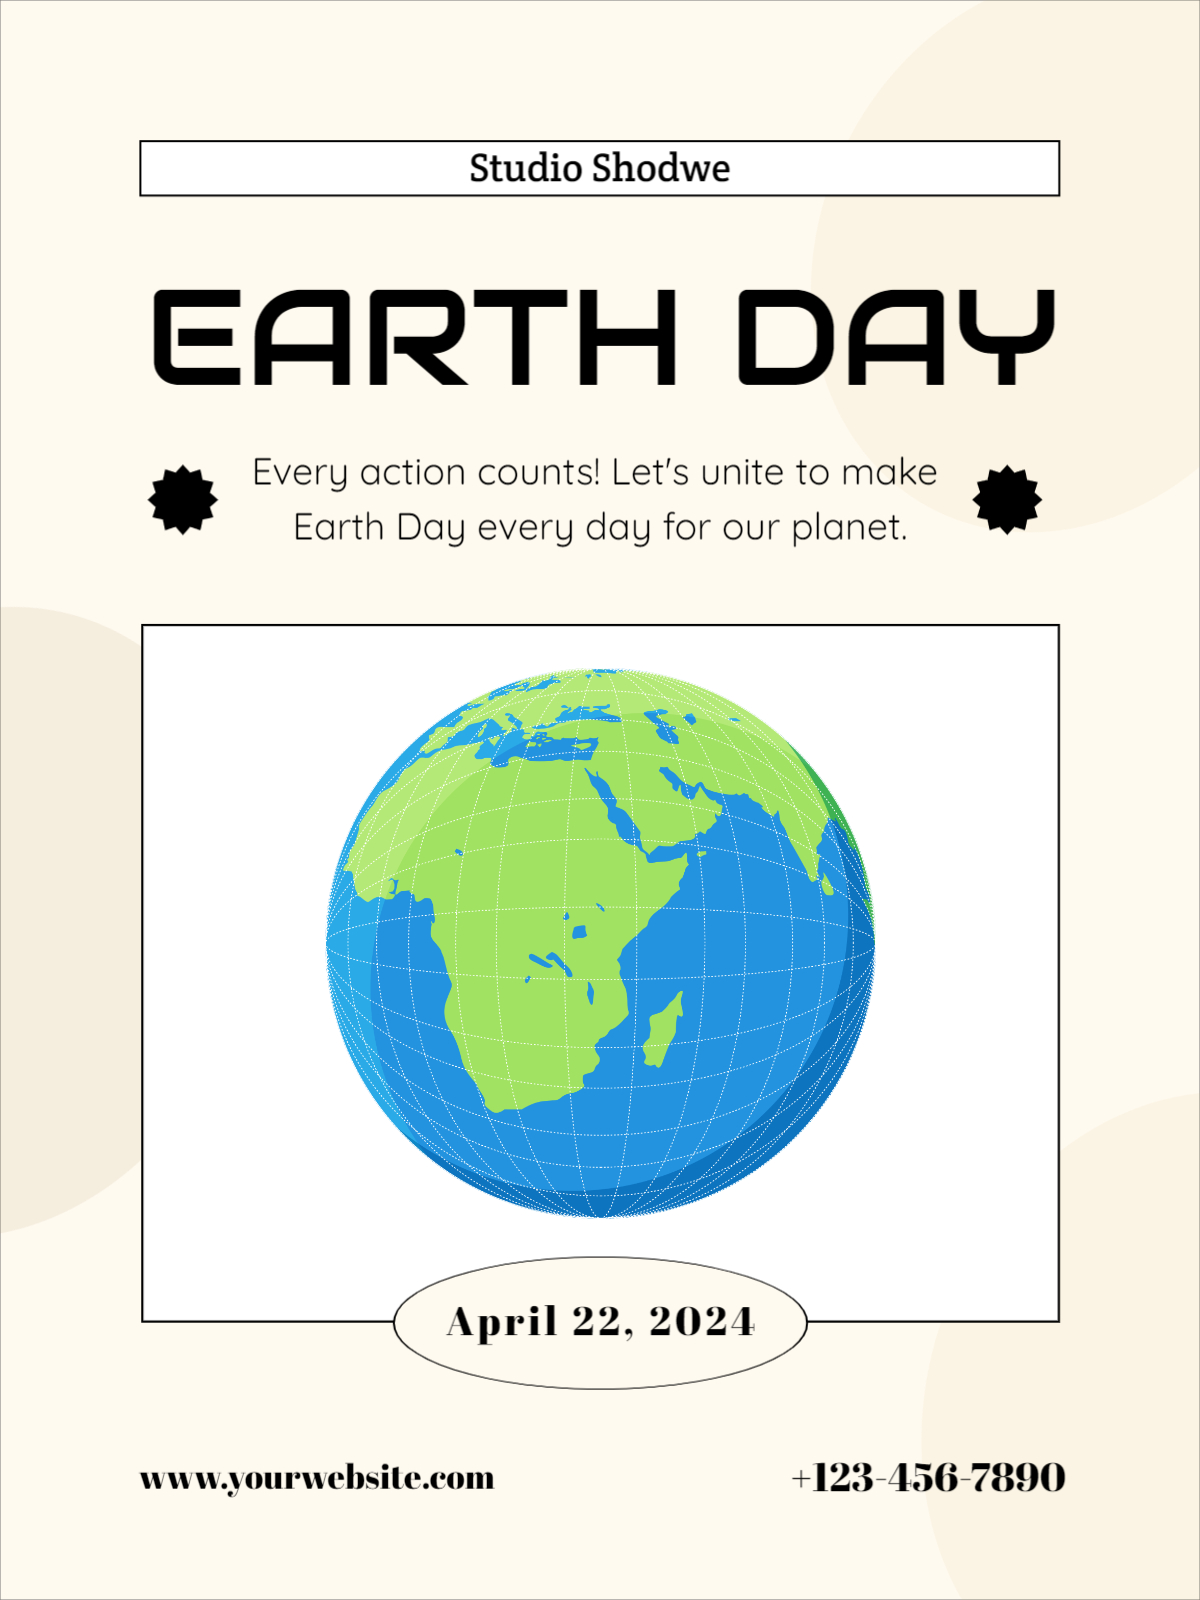 Happy Earth Day poster download for free